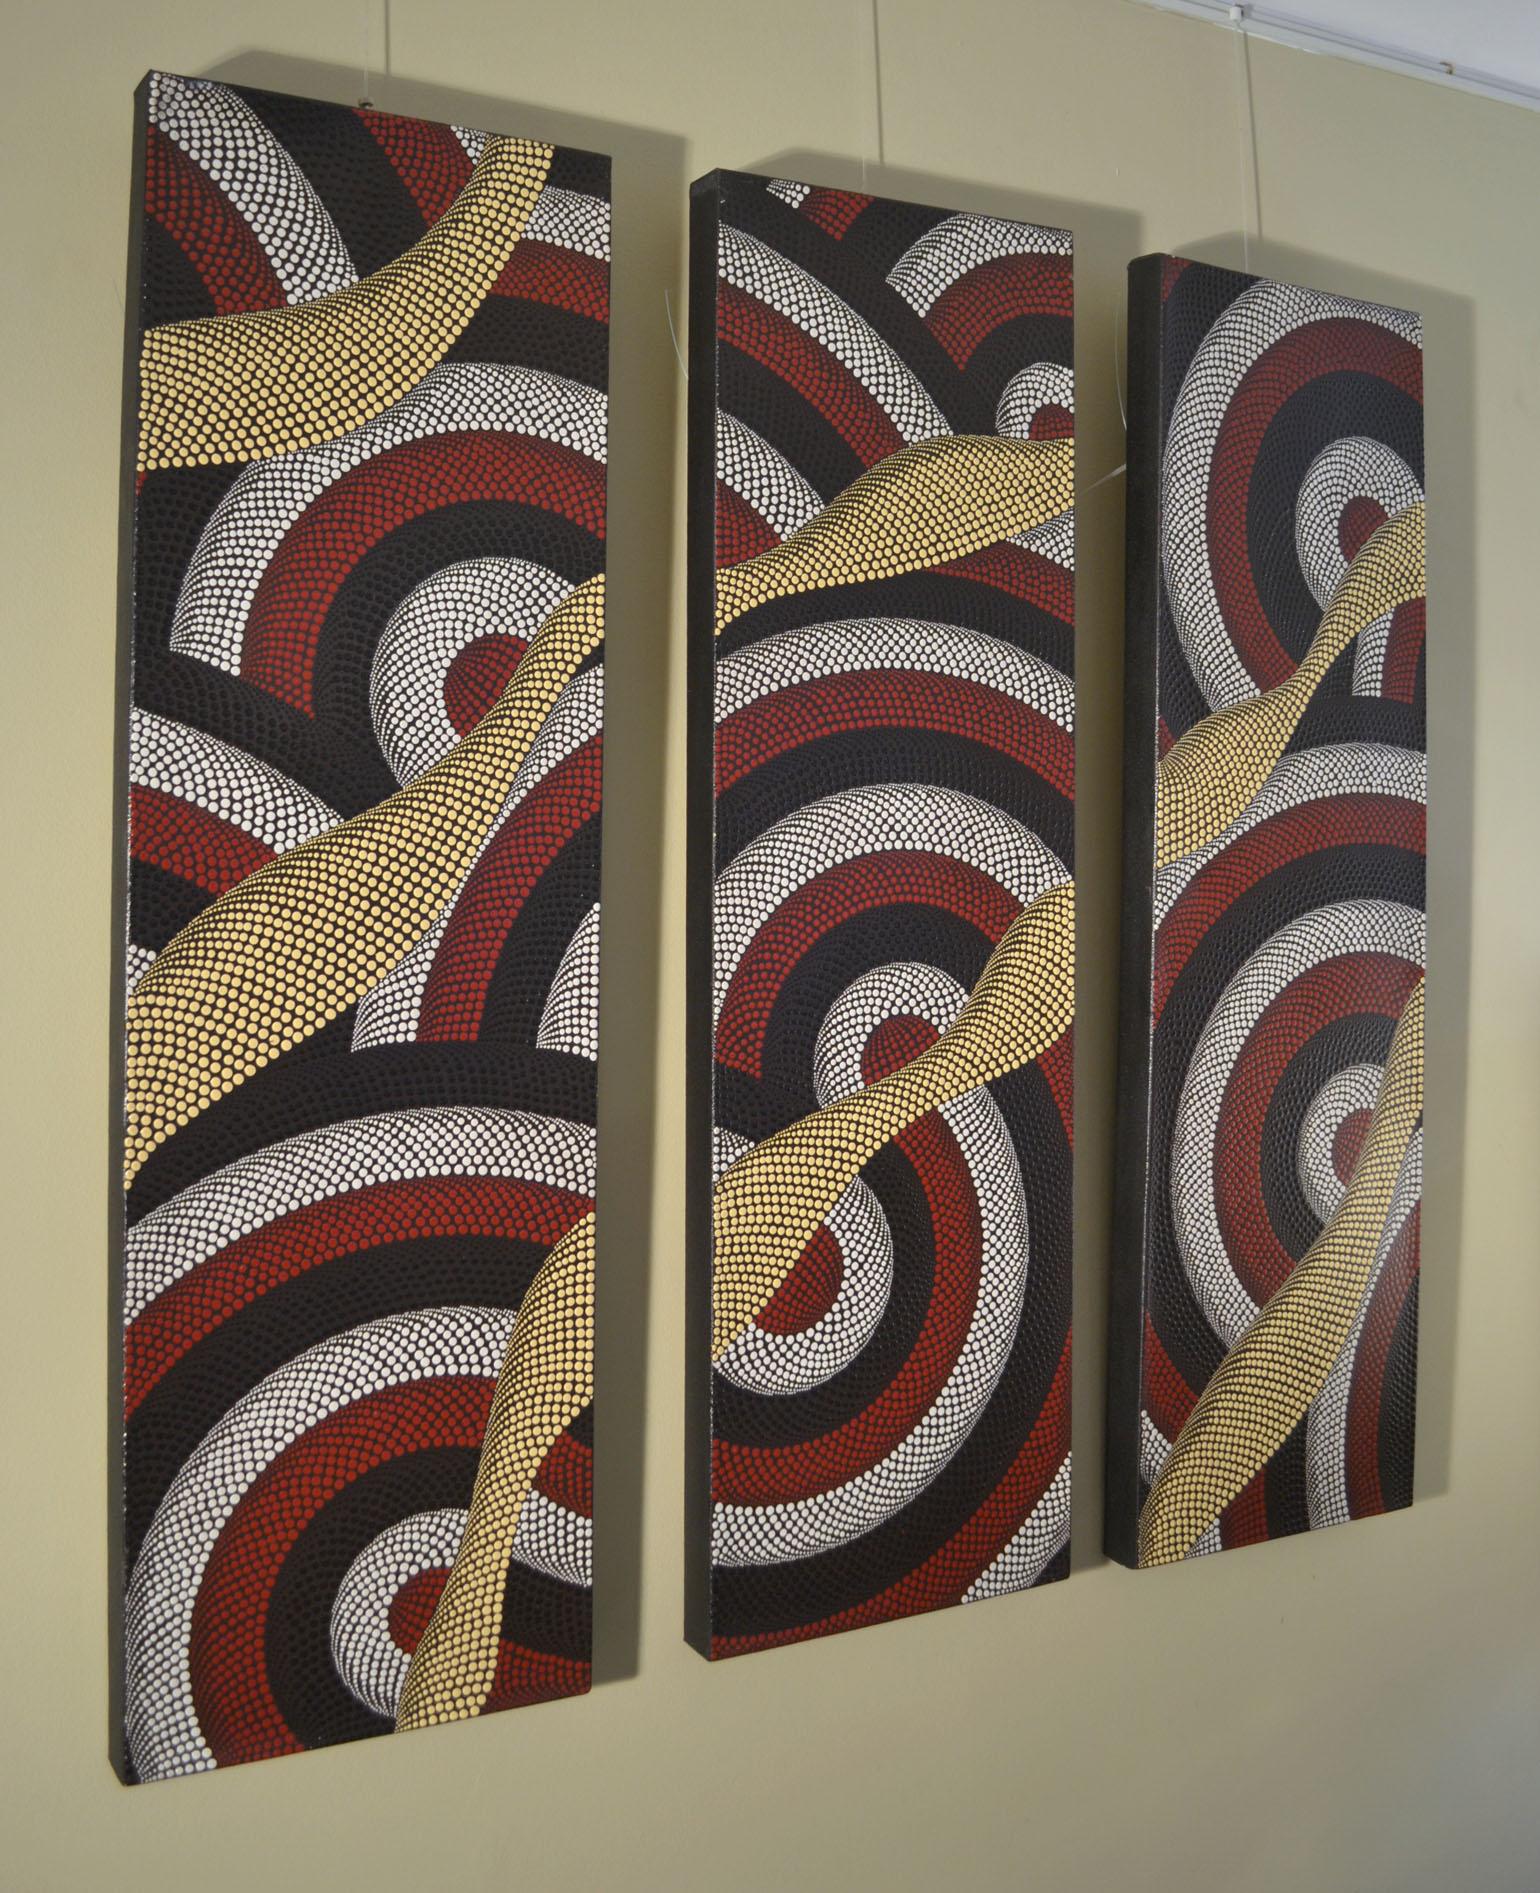 Aboriginal paintings triptych with dots in black, white, red and pale yellow on a black background. Their swirling lines create an optical illusion with the dots descending in size. The painting was purchased by the previous owner in the mid-1980s